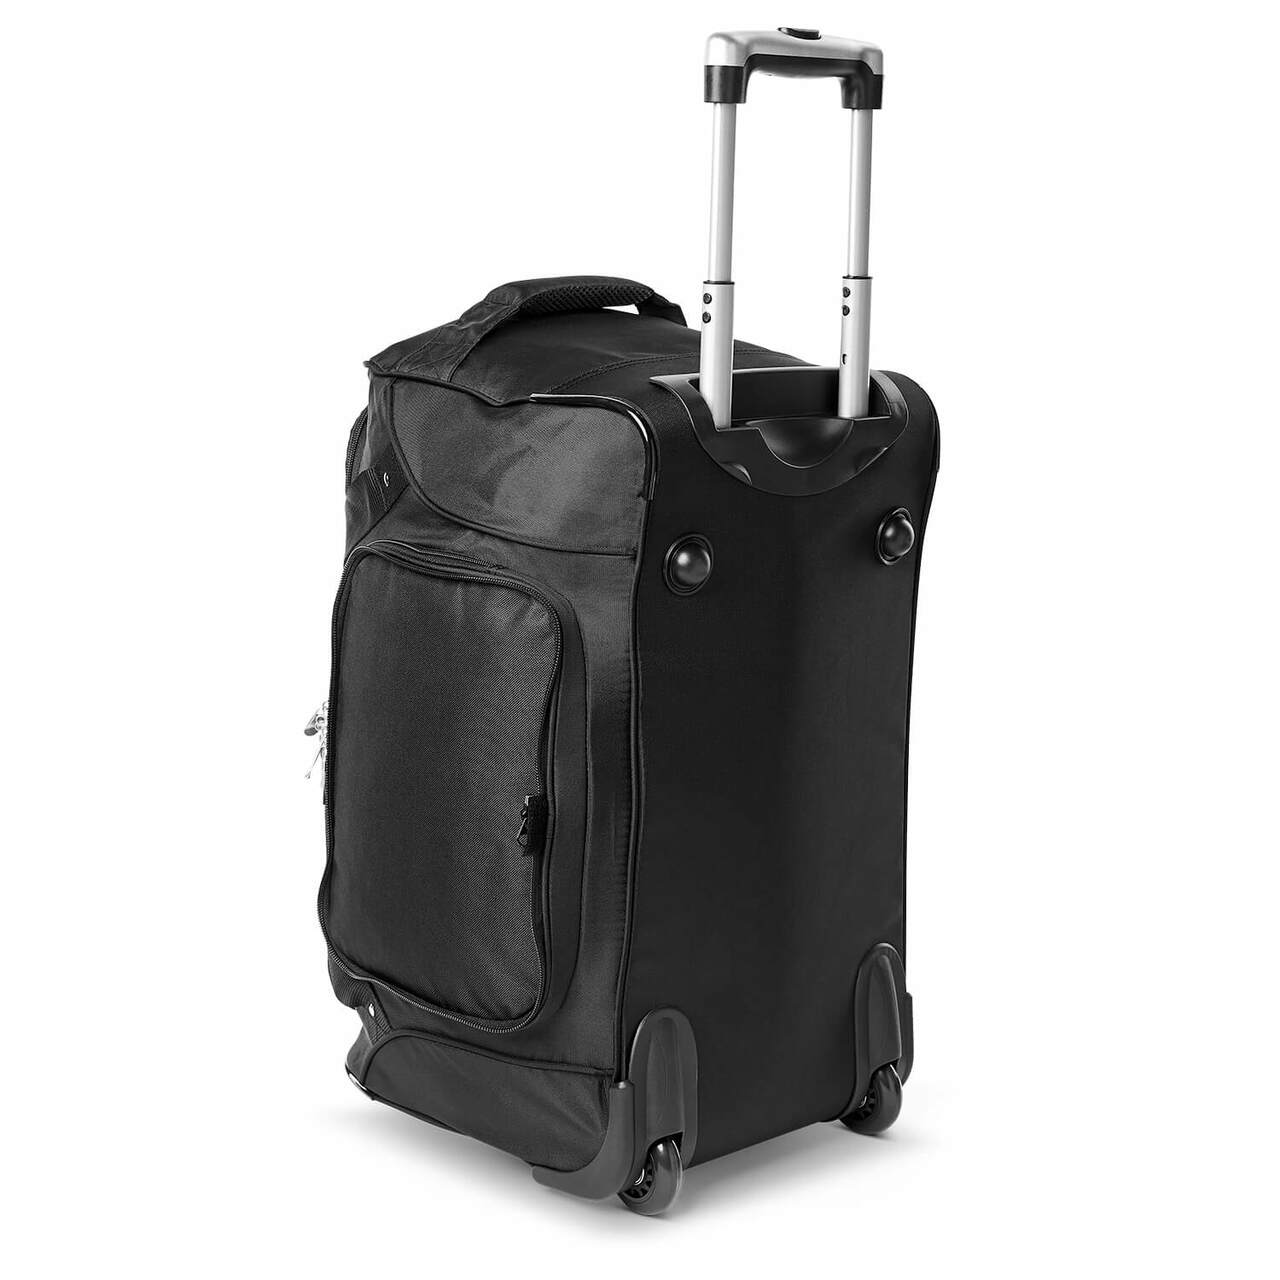 Penn State Nittany Lions Luggage | Penn State Nittany Lions Wheeled Carry On Luggage